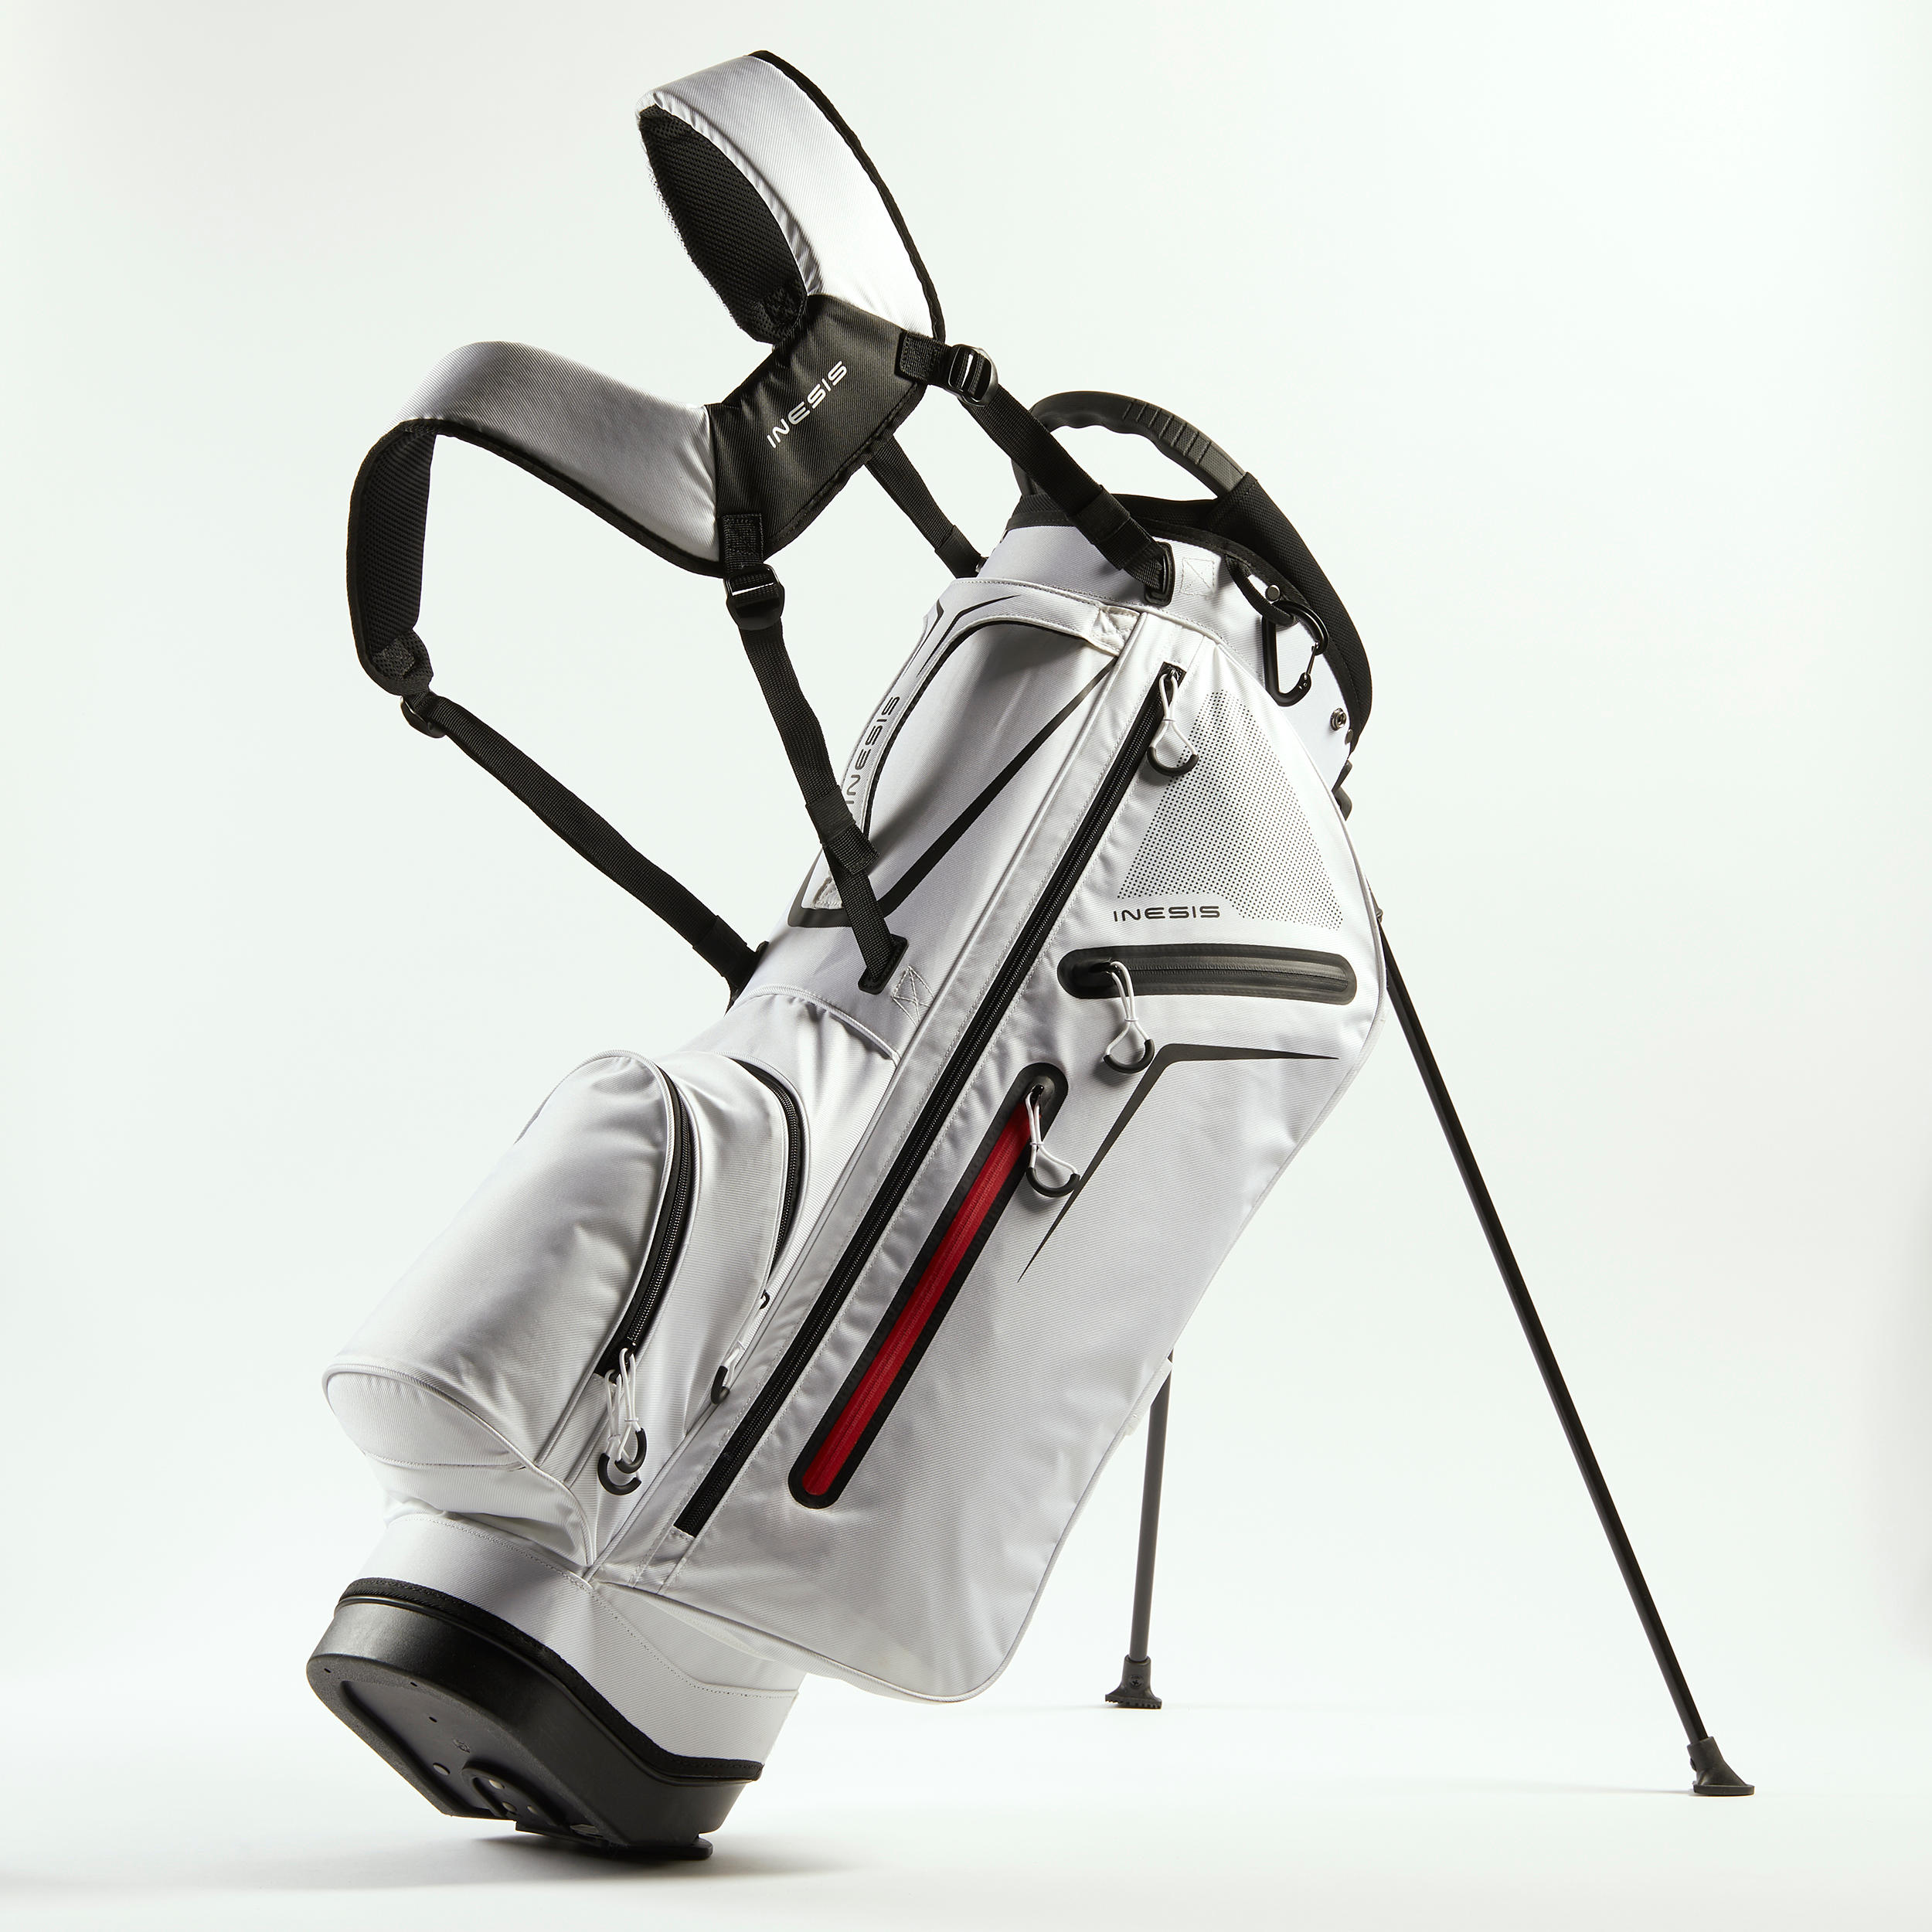 DXR Material The Ultimate in Lightweight Golf Bag Material